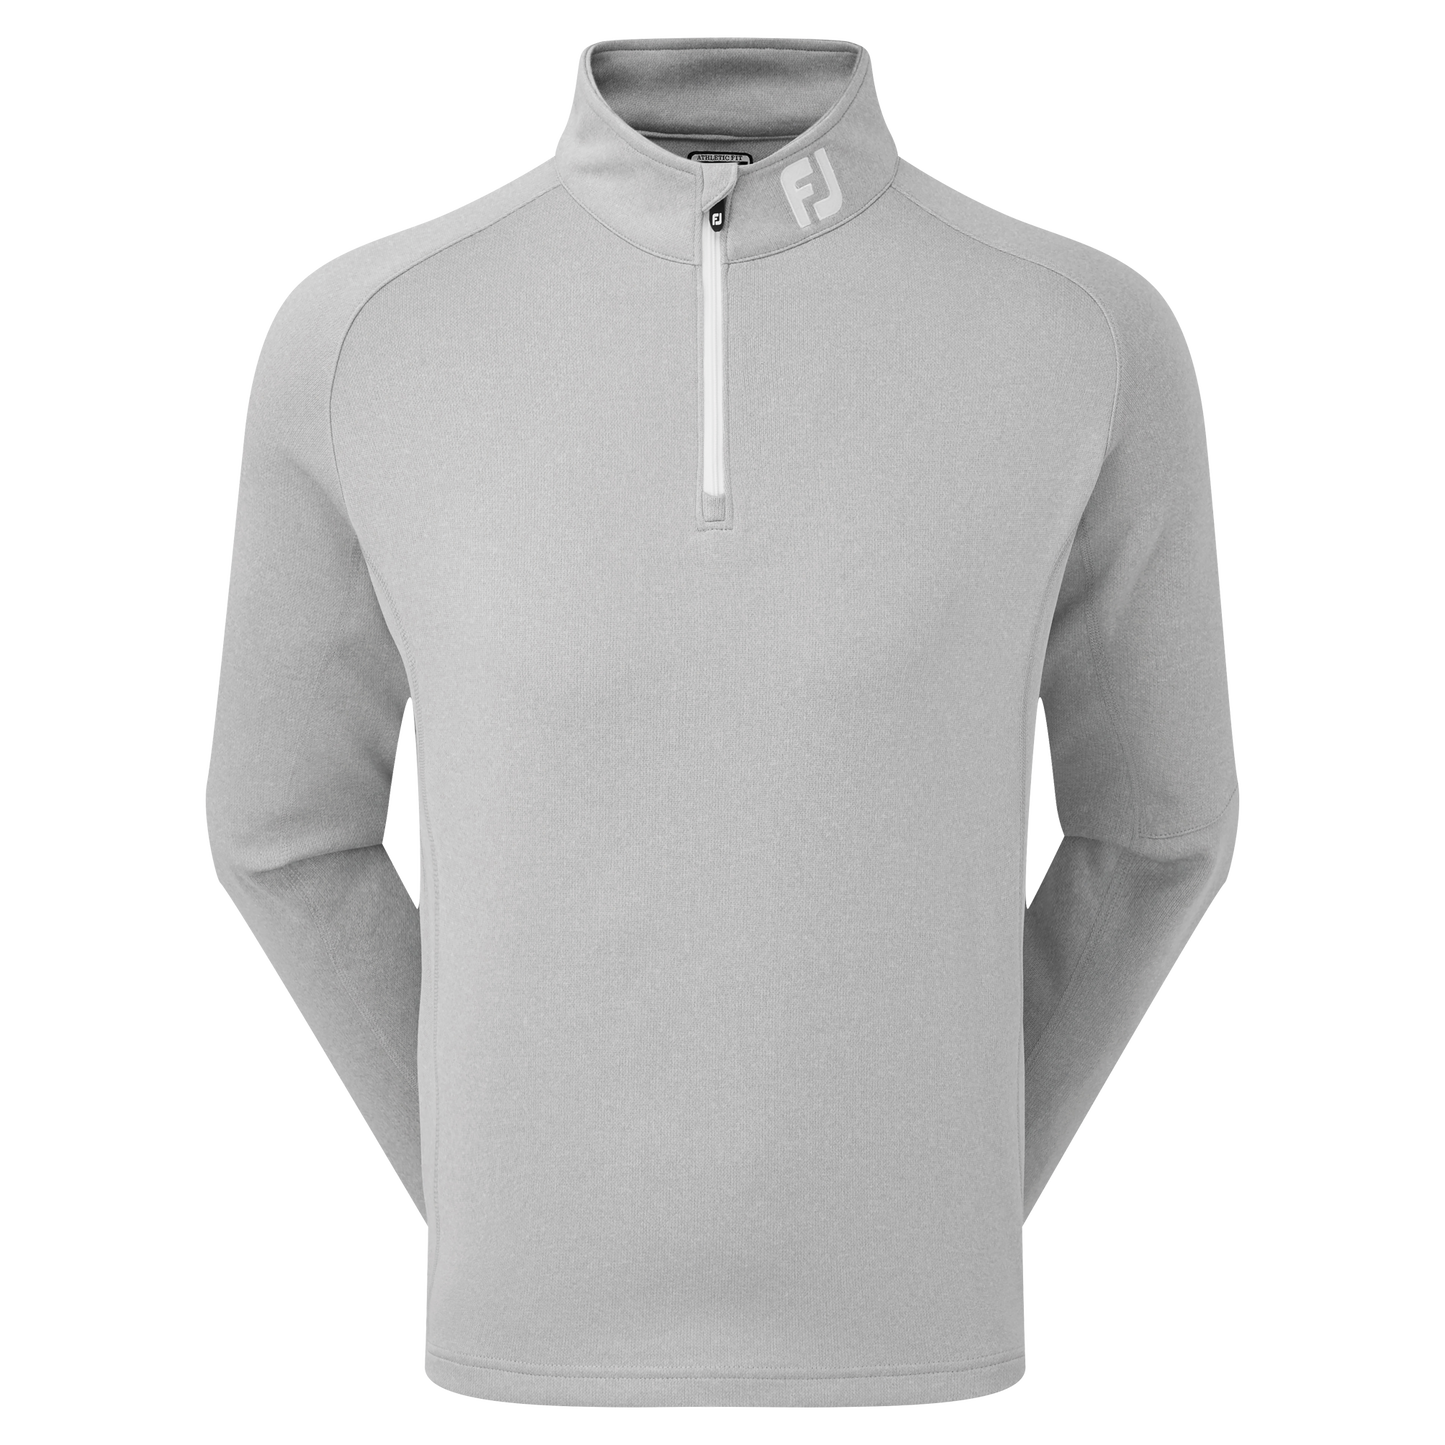 FootJoy Golf Chill Out 1/2 Zip Pullover Top 90149 Heather Grey M 